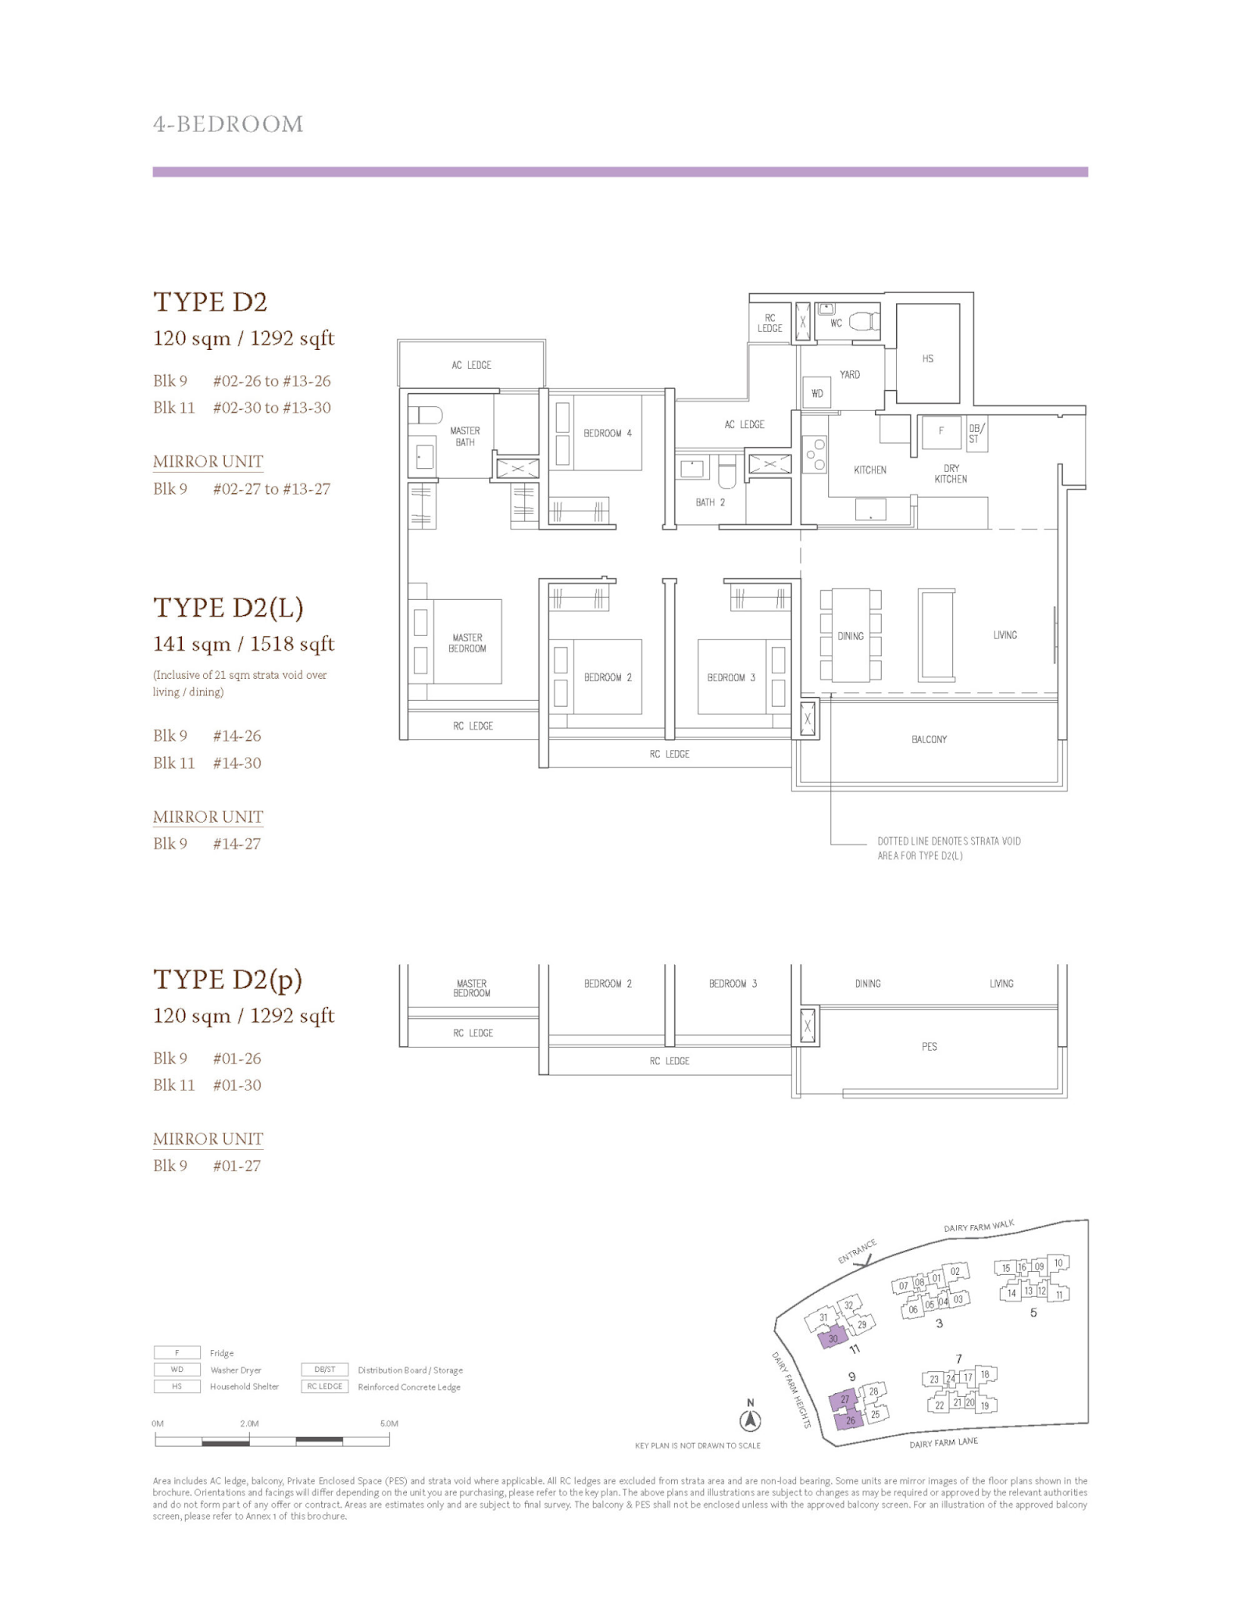 The Botany at Dairy Farm 4 Bedroom Type D2 1292 Sq ft floor plan